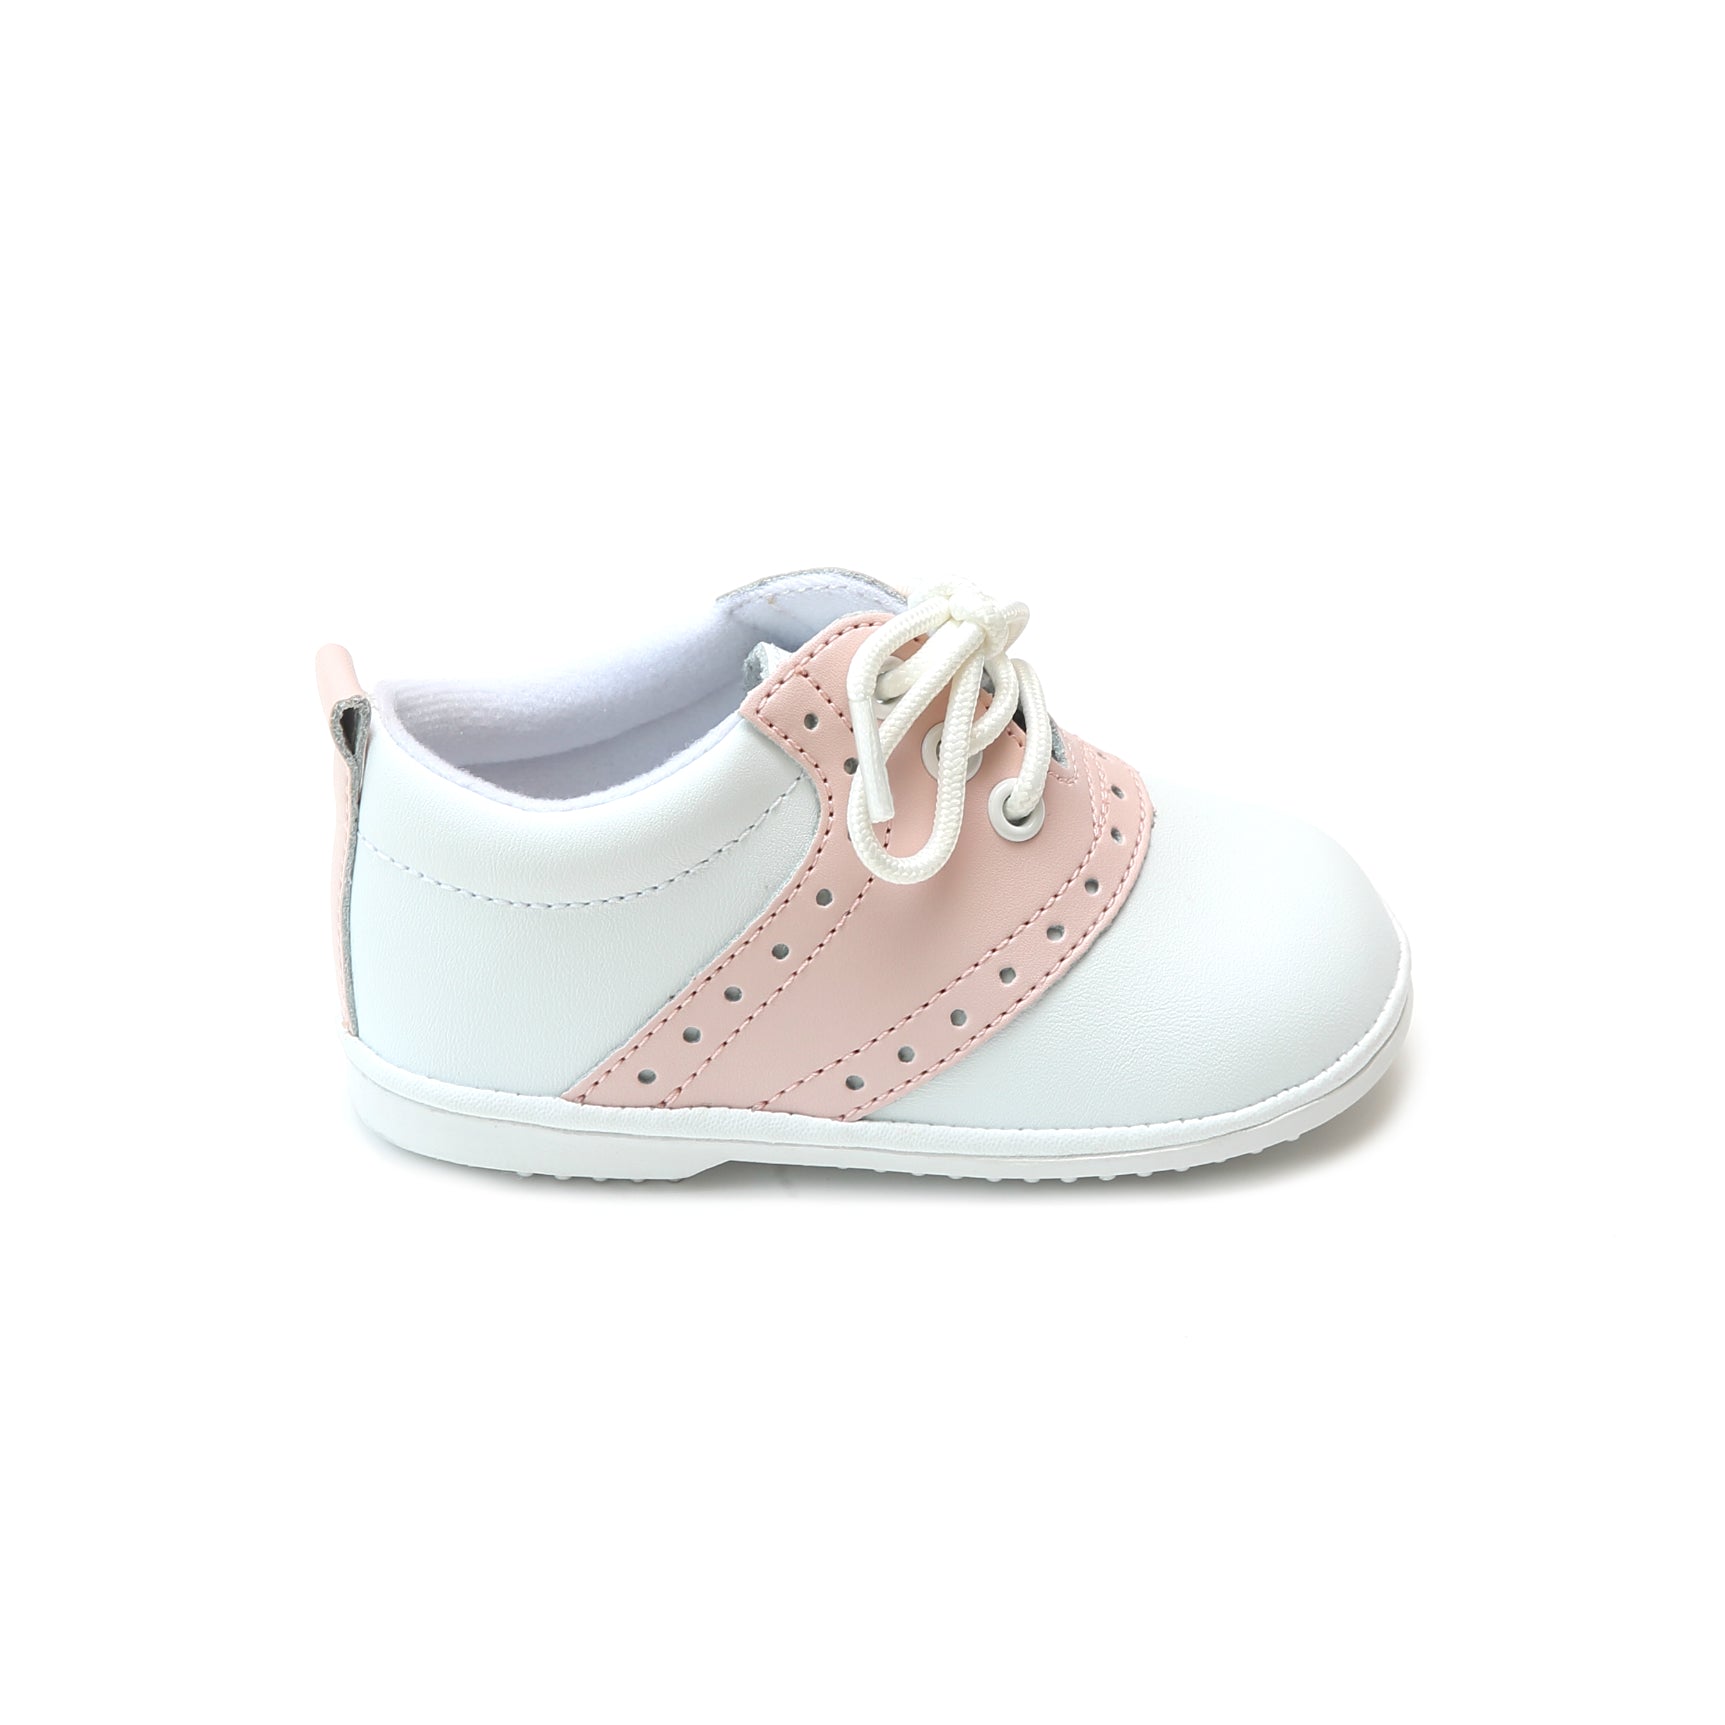 saddle oxford shoes for girls